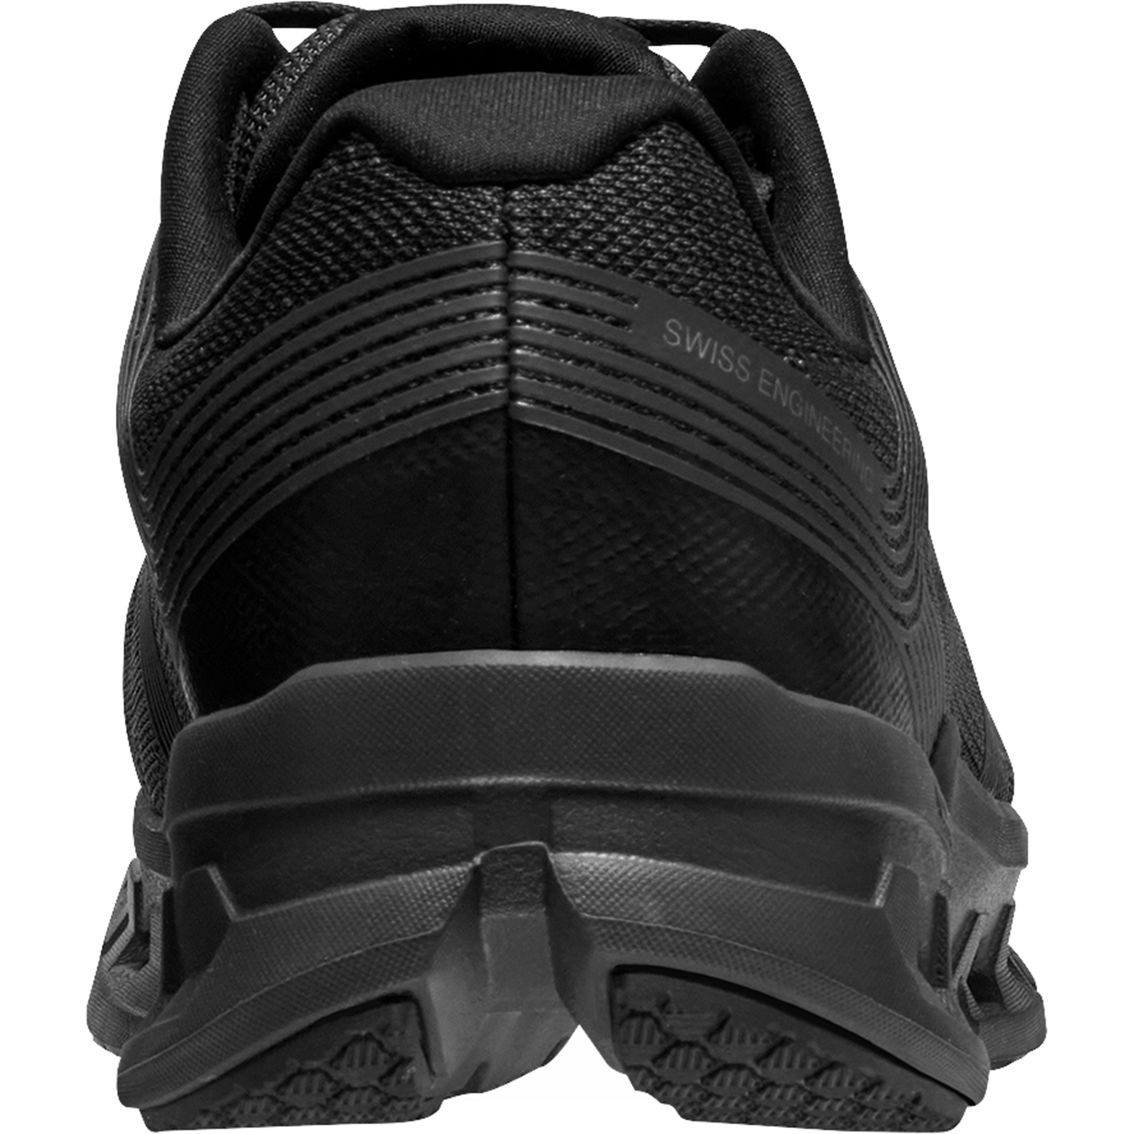 On Men's Cloudgo Running Shoes - Image 6 of 6